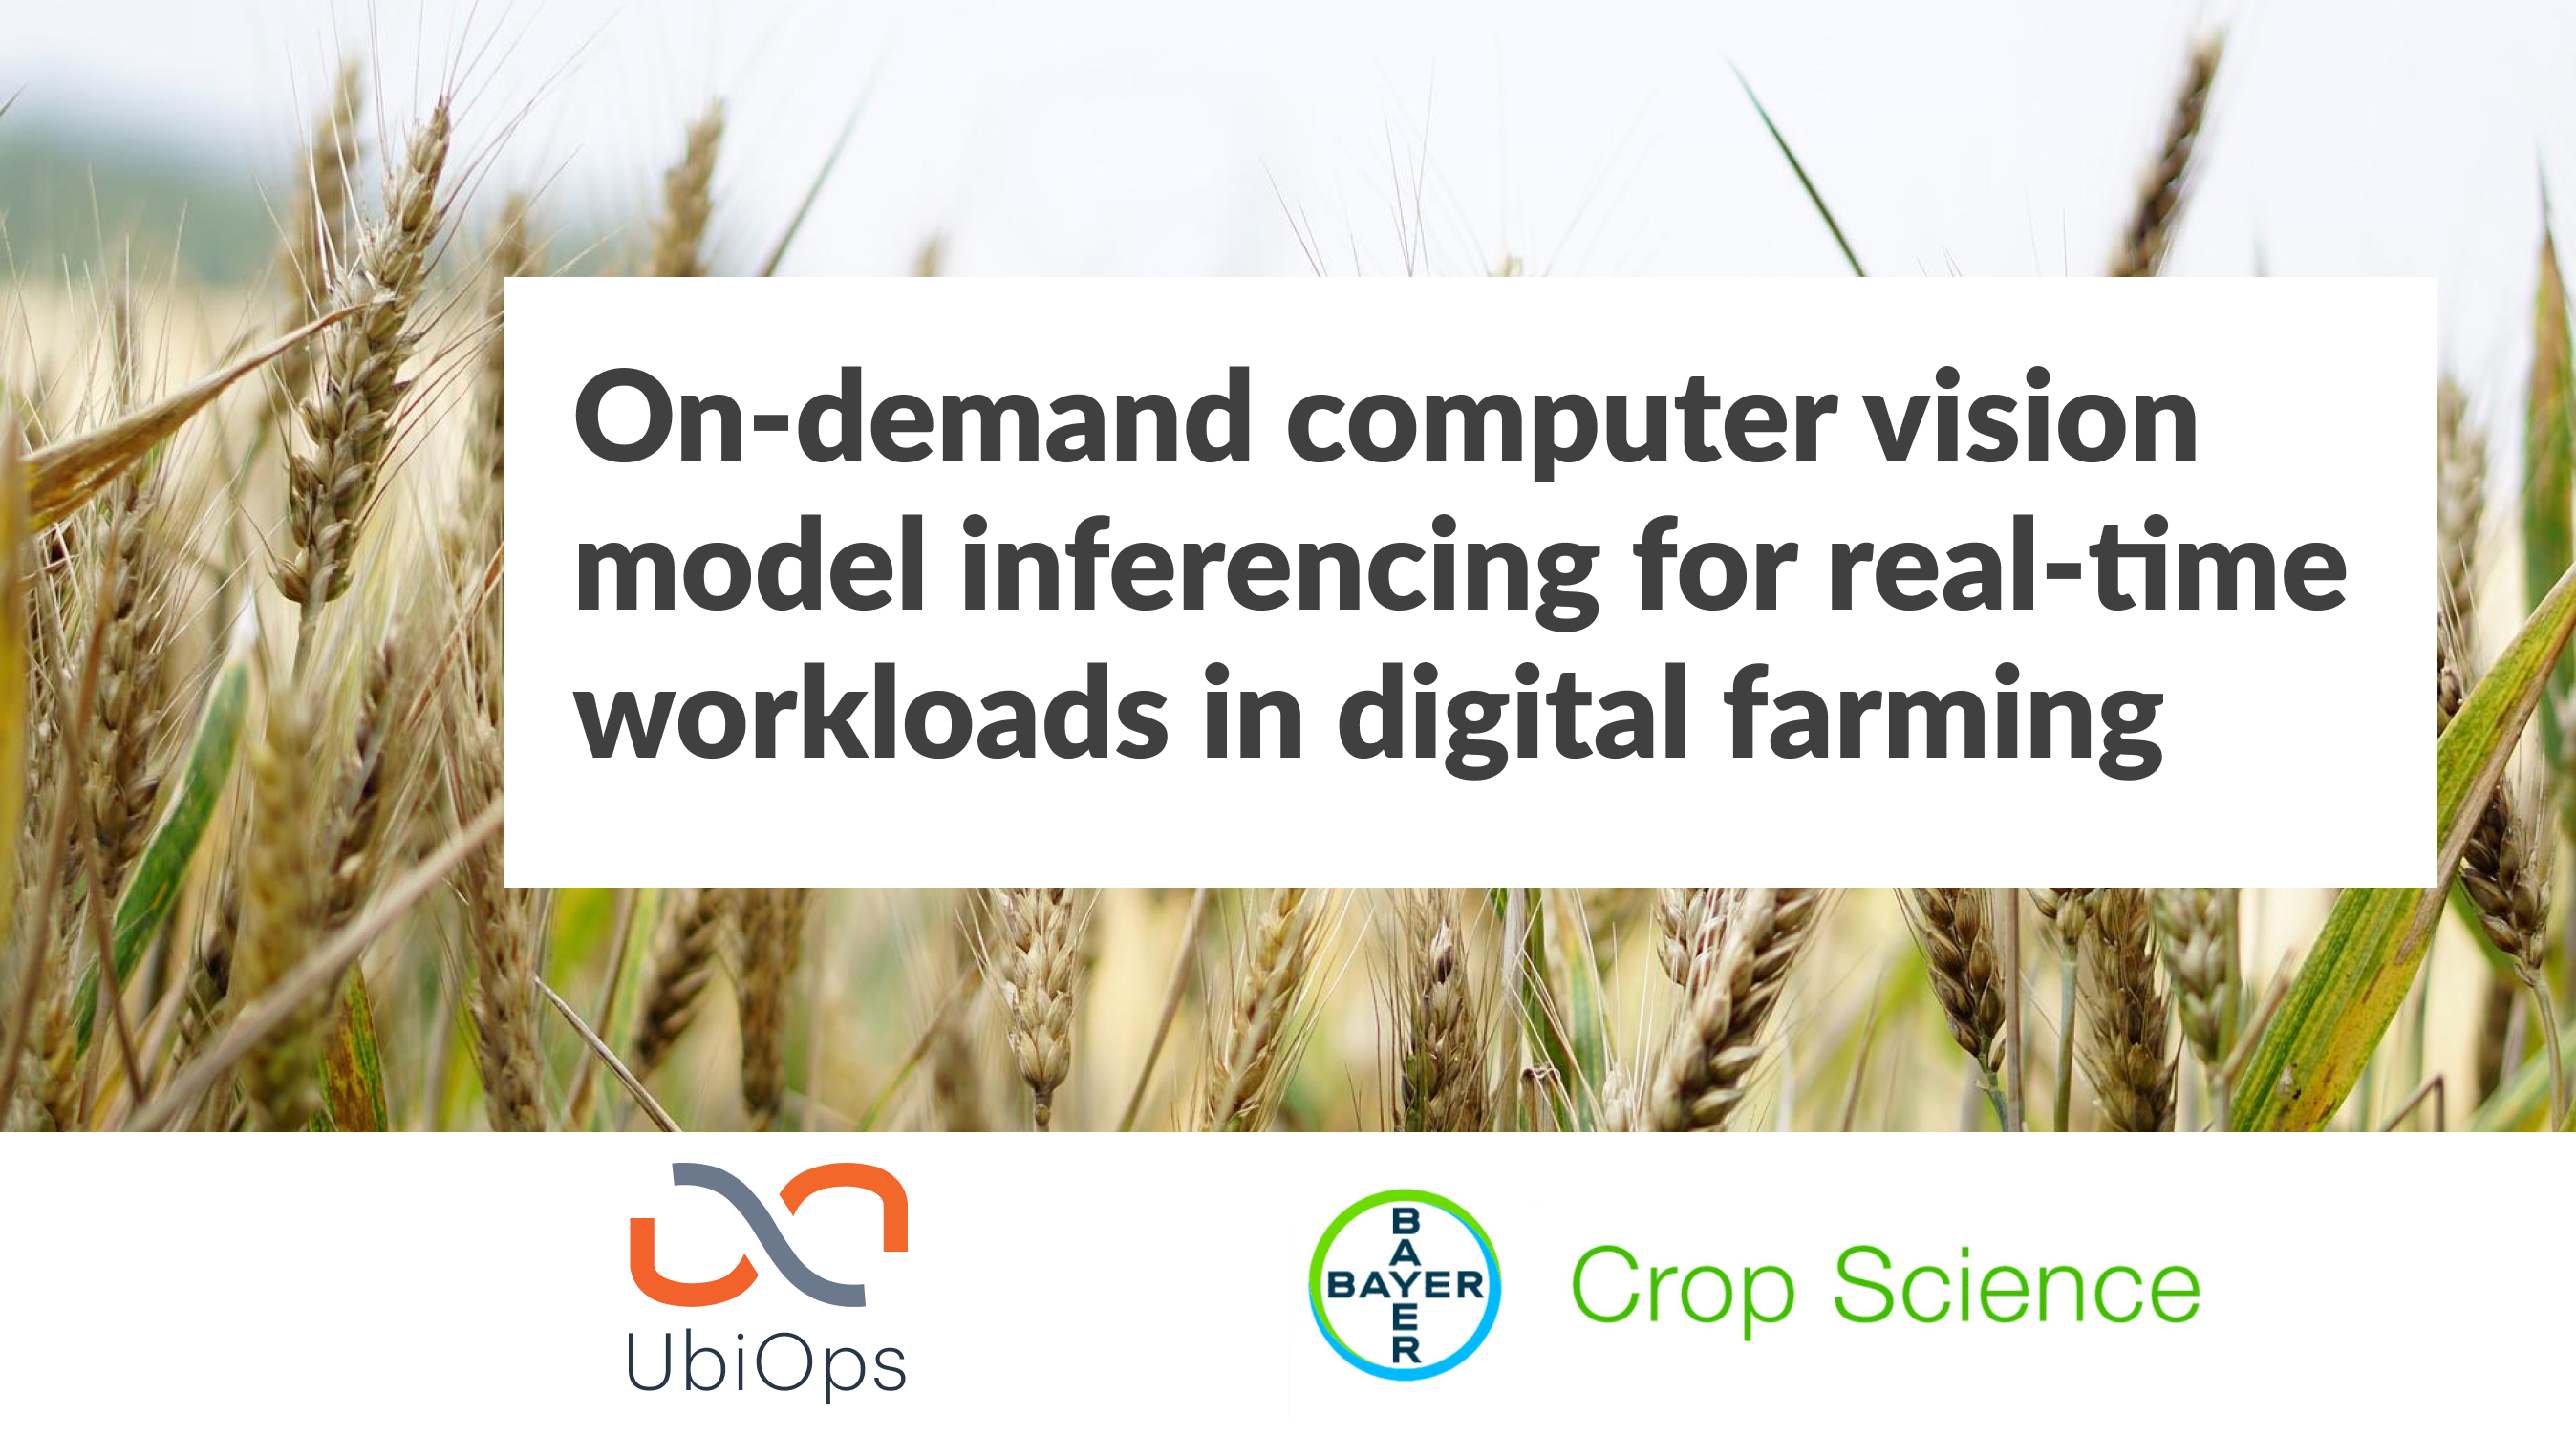 On-demand computer vision model inferencing for real-time workloads in digital farming